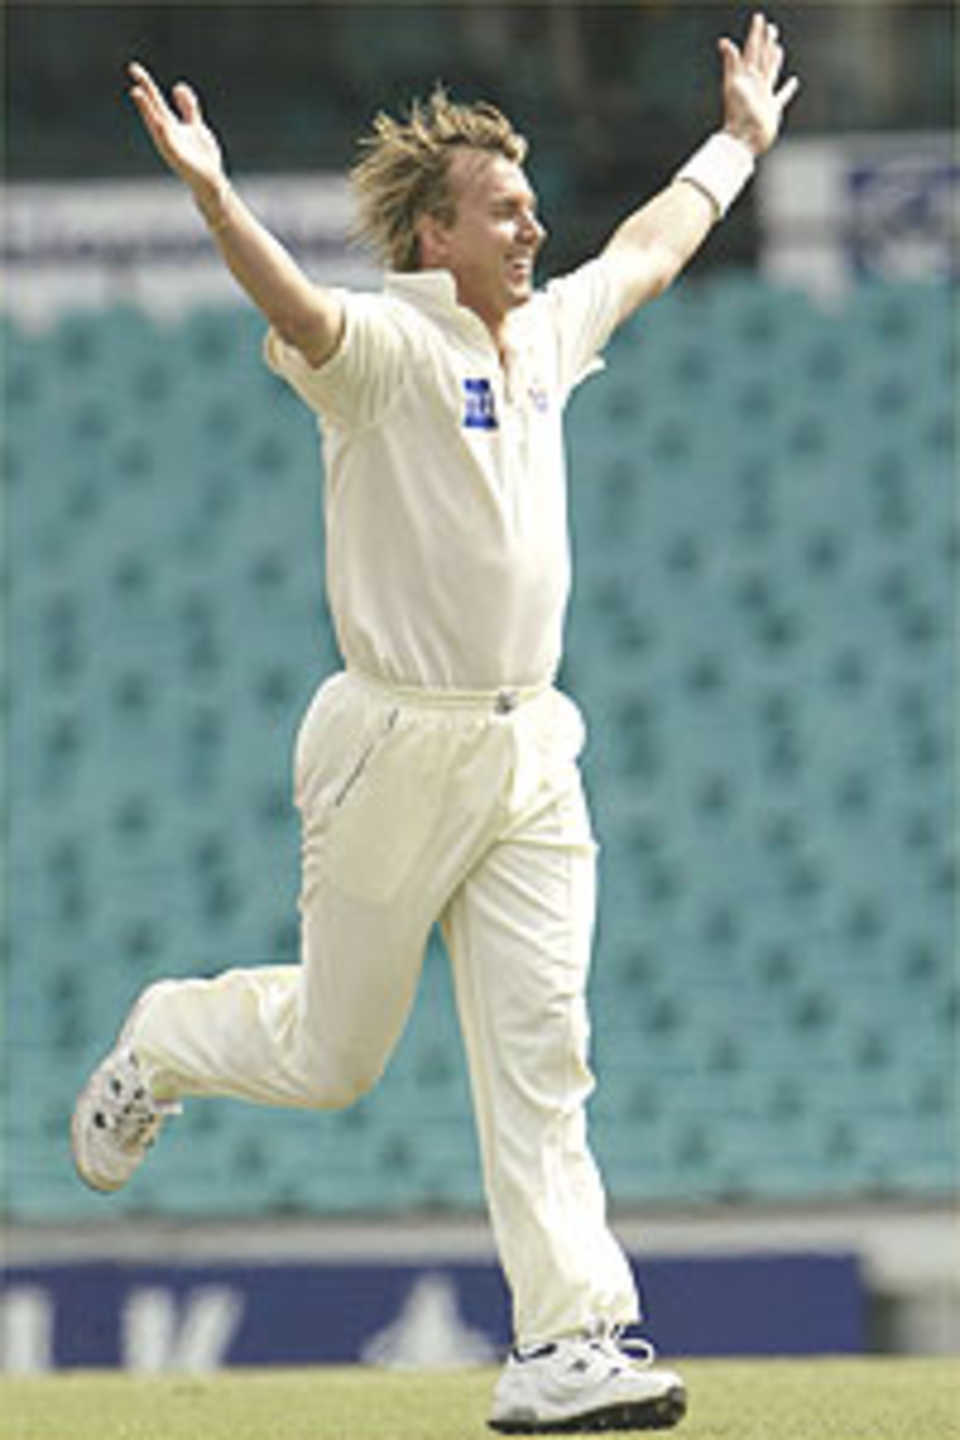 Brett Lee of the Blues celebrates after taking the wicket of Jamie Cox of the Tigers during play on day three of the Pura Cup cricket match between the NSW Blues and Tasmanian Tigers at the SCG December 21, 2003 in Sydney, Australia